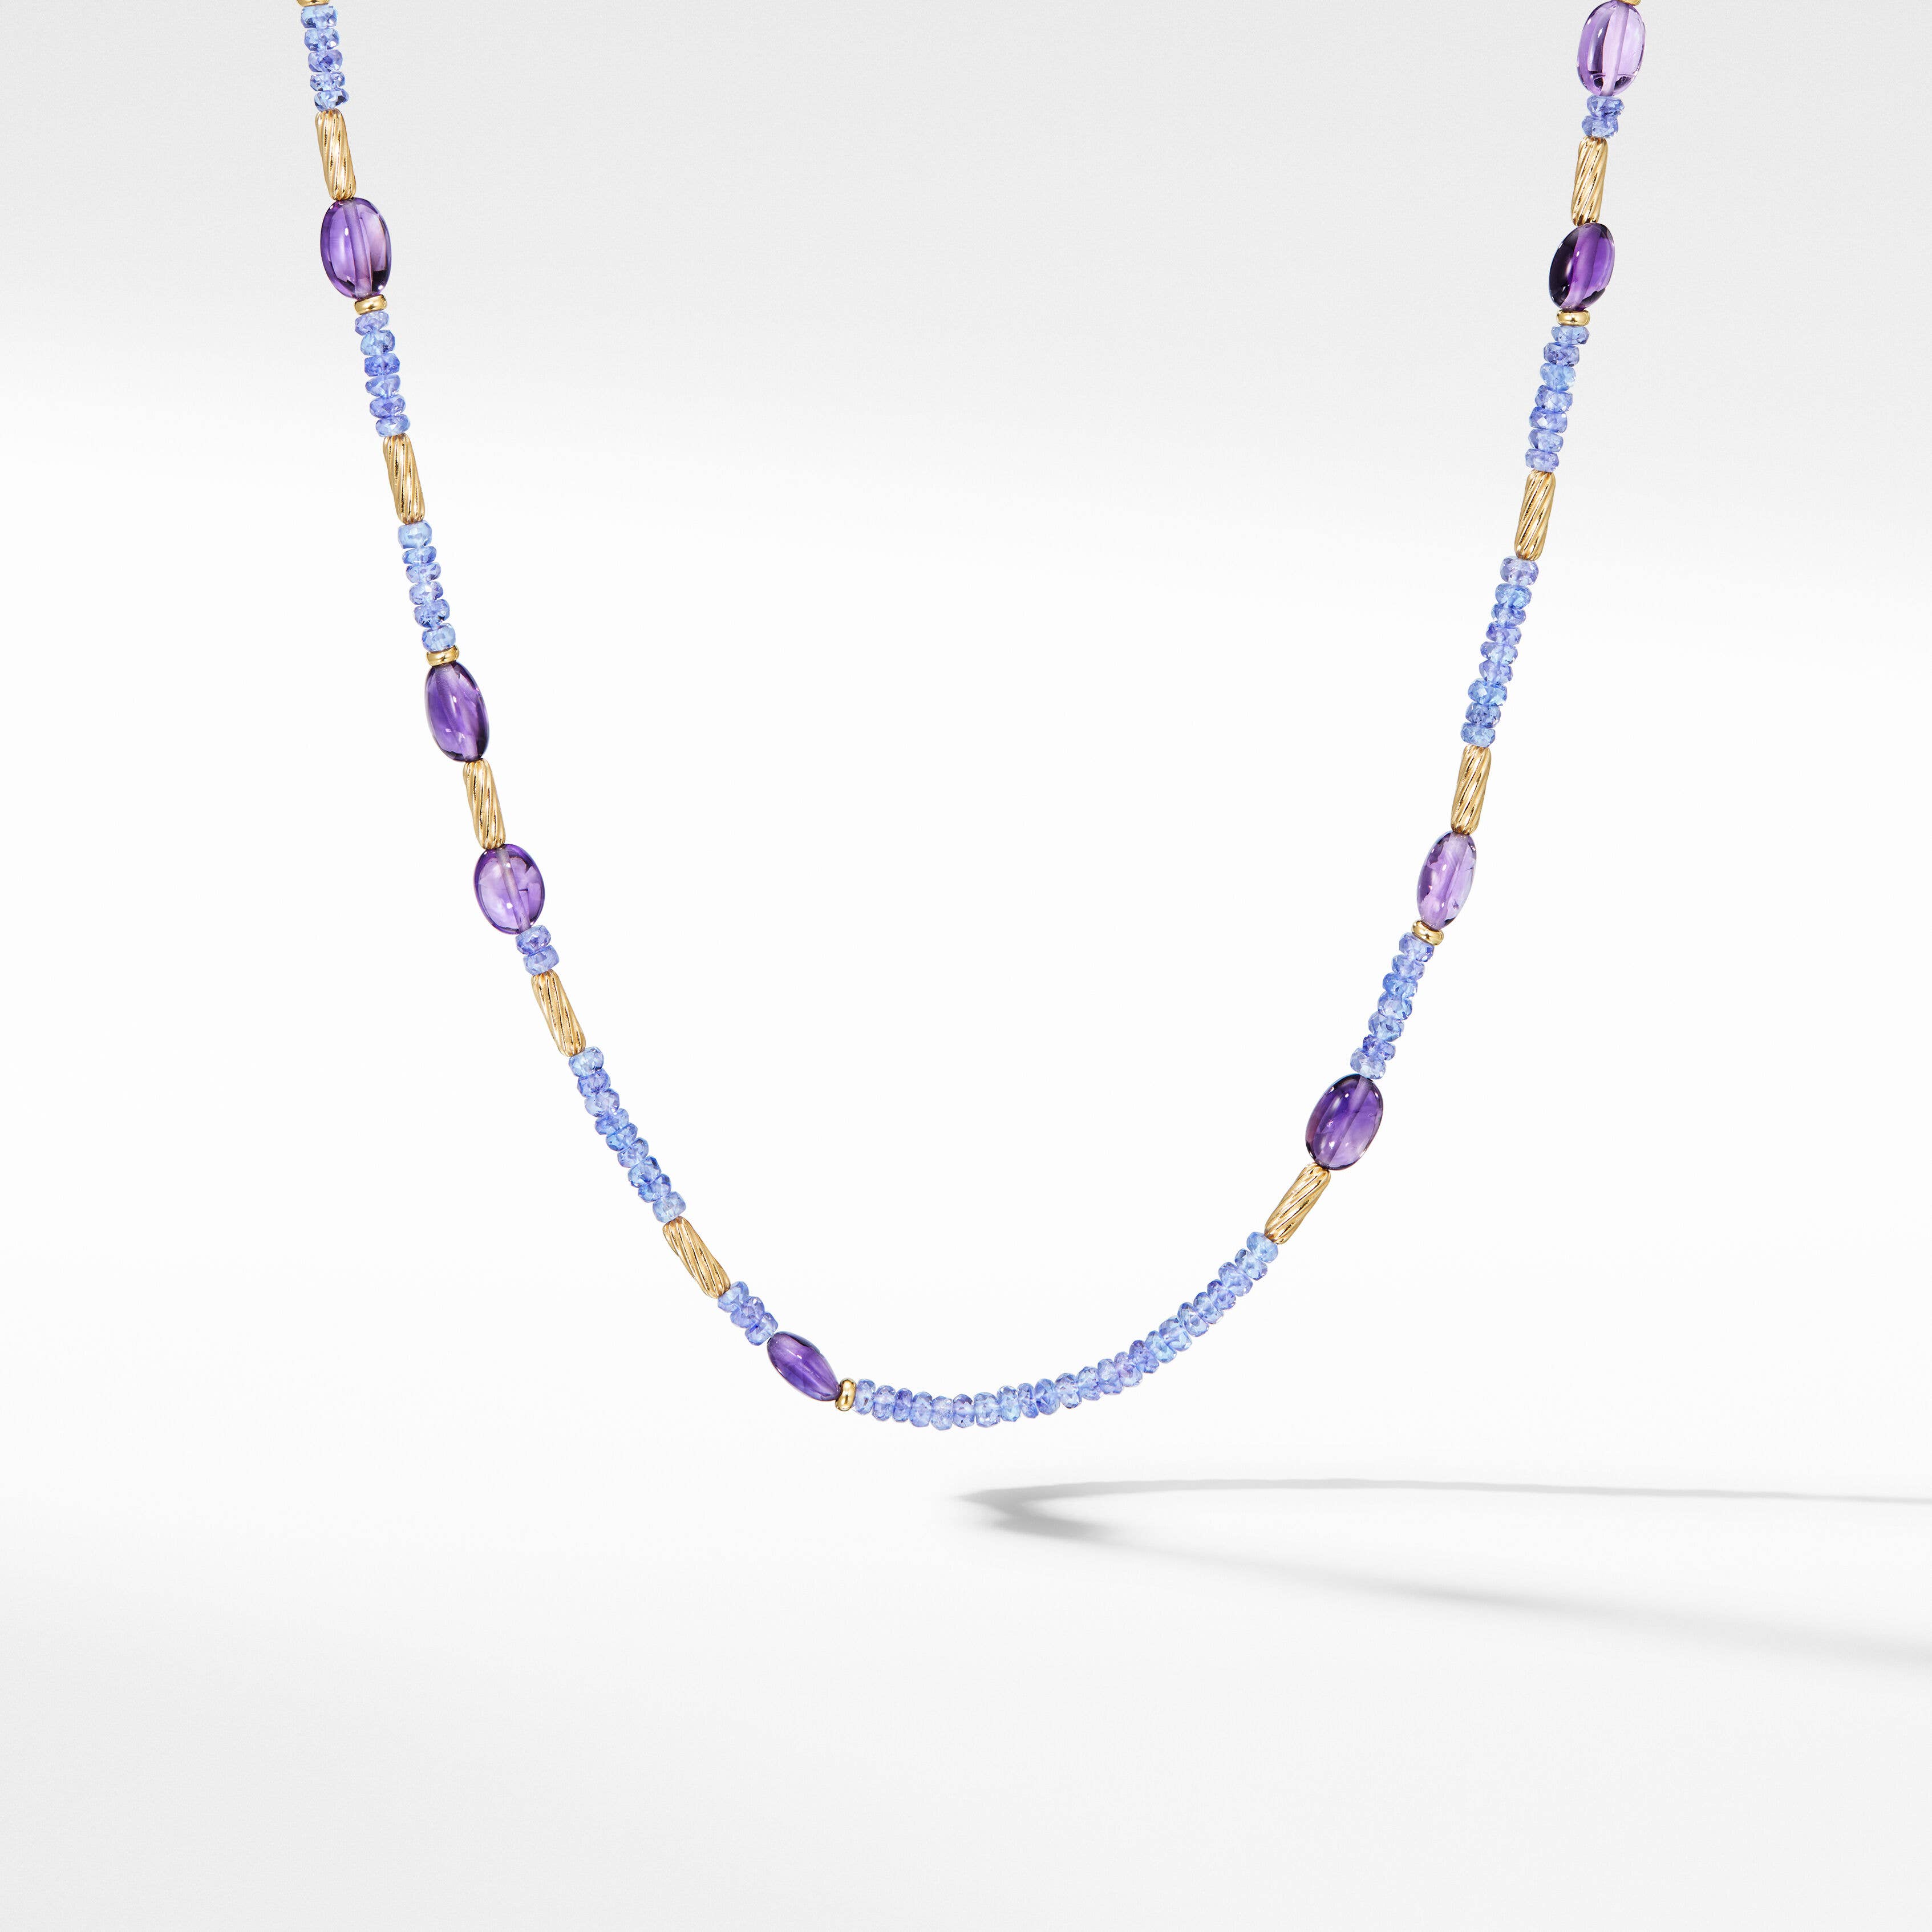 Tweejoux Necklace with Tanzanite, Amethyst and 18K Yellow Gold